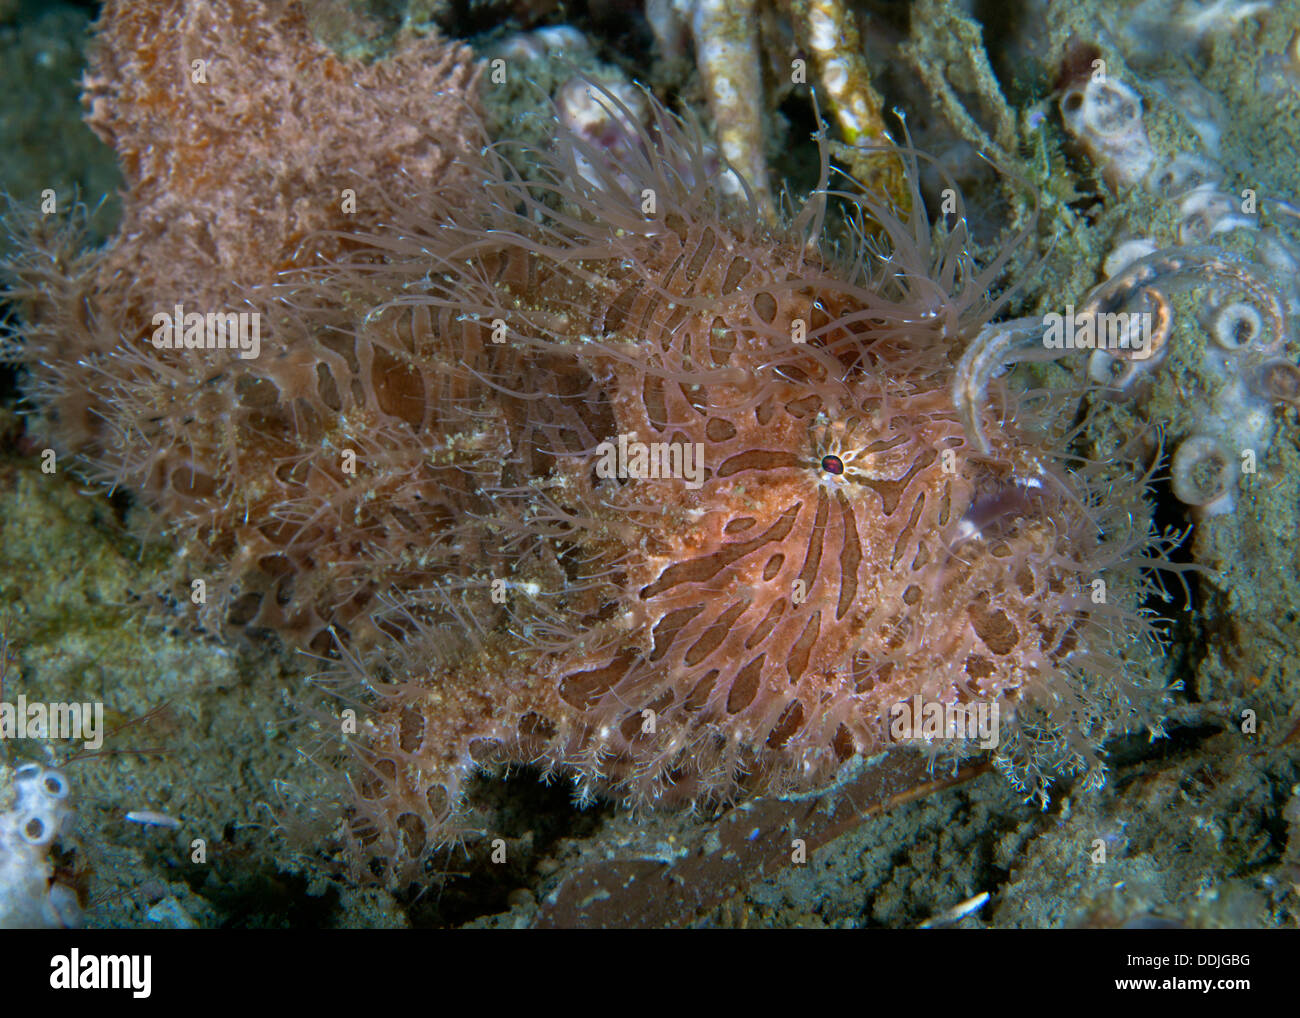 Close up image of hairy frogfish casting its lure. Puerto Galera, Philippines Stock Photo